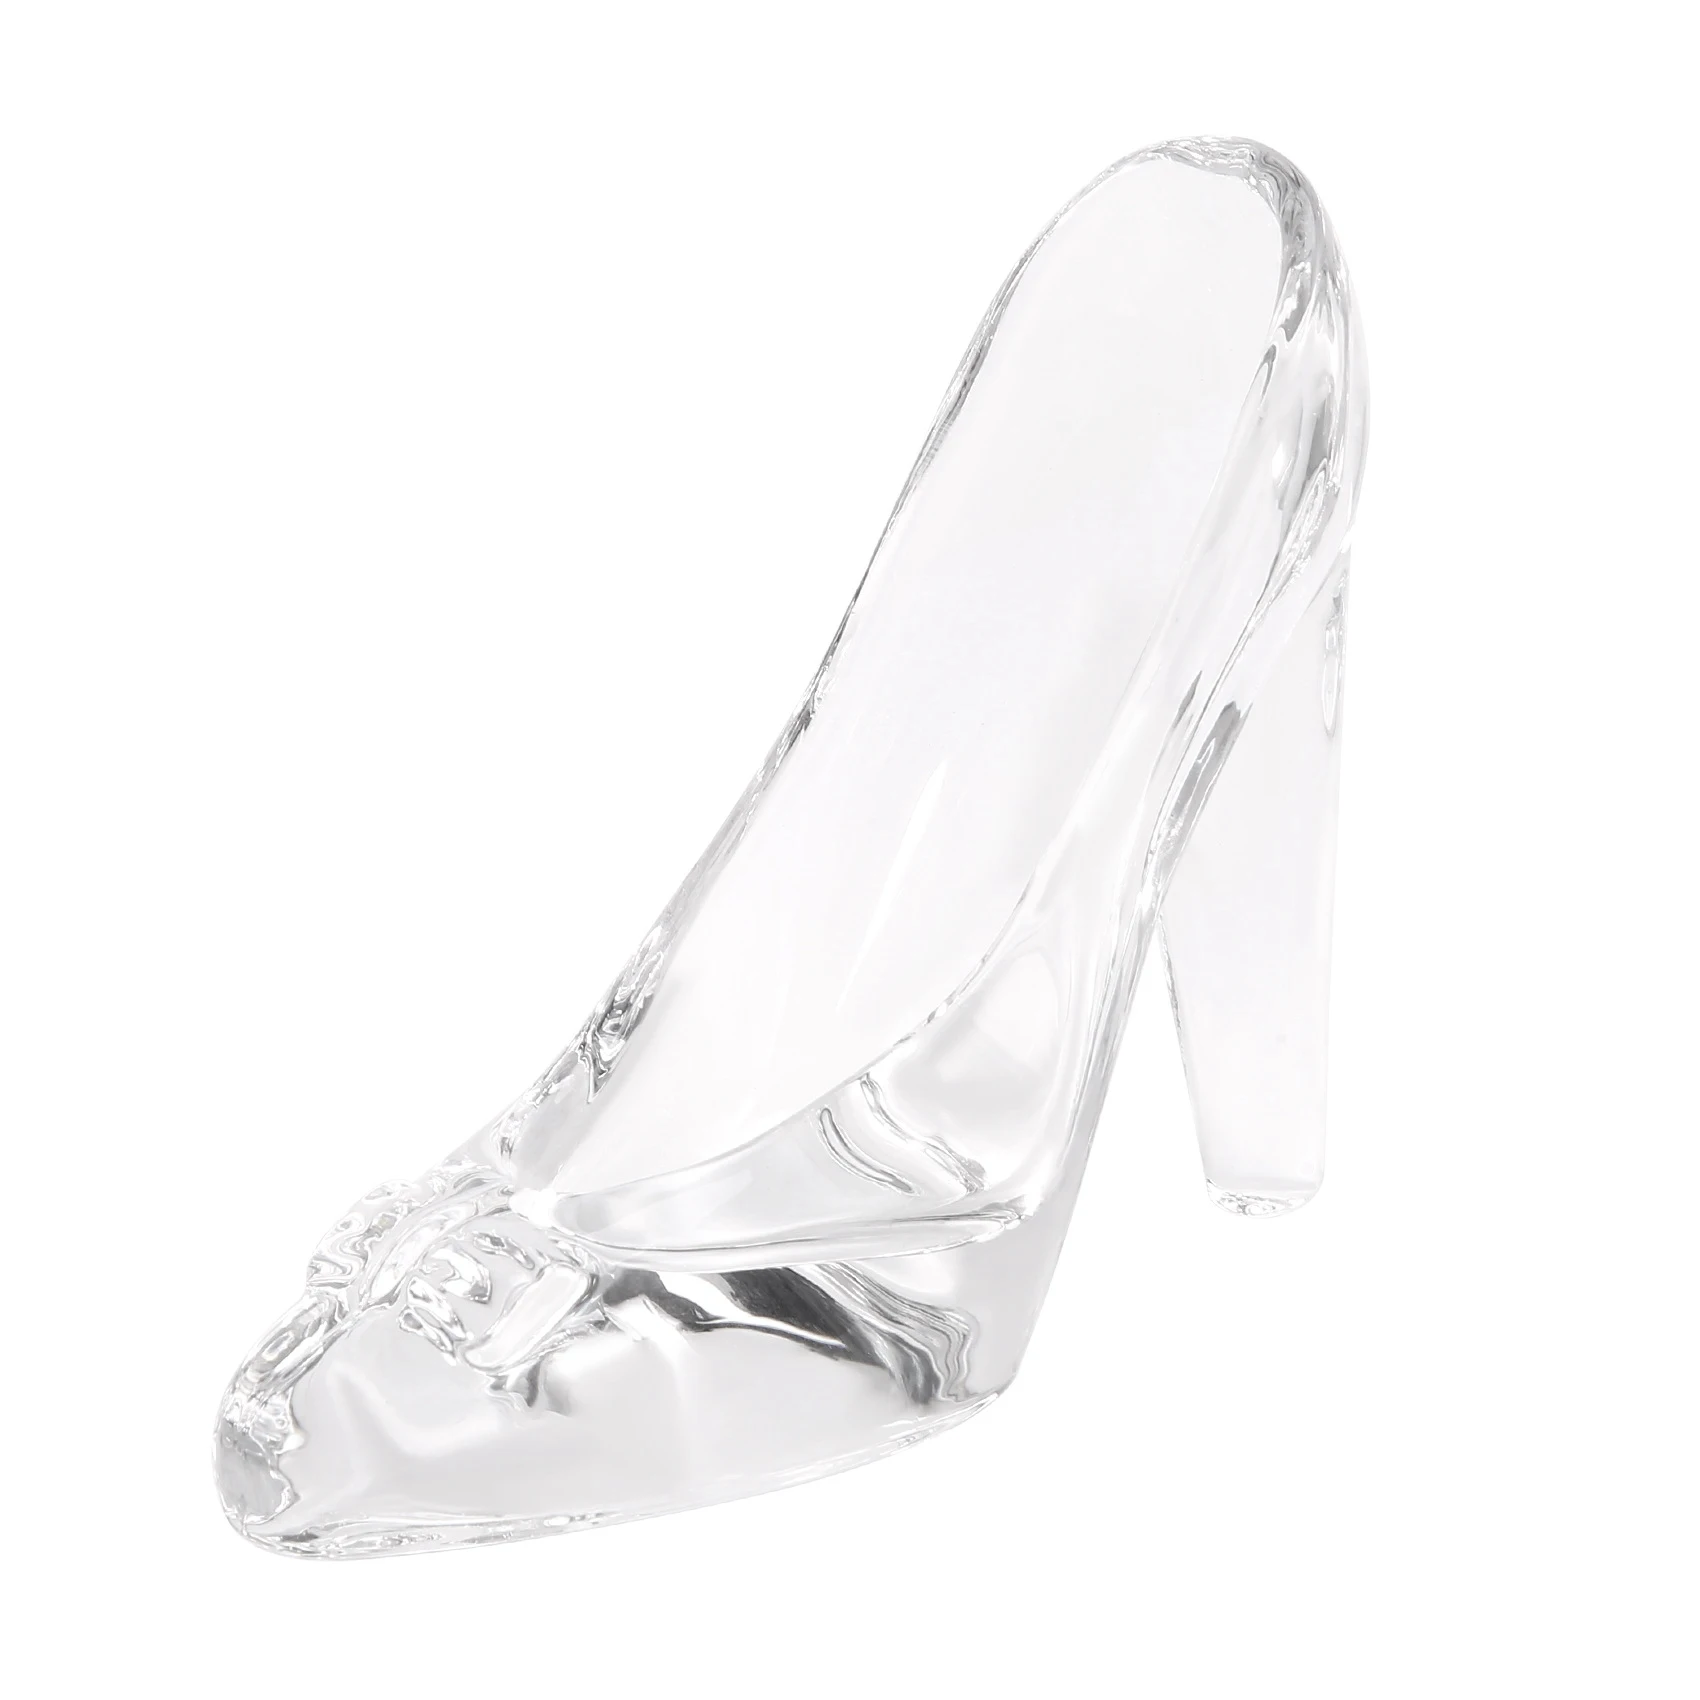 

Crystal Shoes Glass Birthday Gift Home Decor Cinderella High-Heeled Shoes Wedding Shoes Figurines Miniatures Ornament